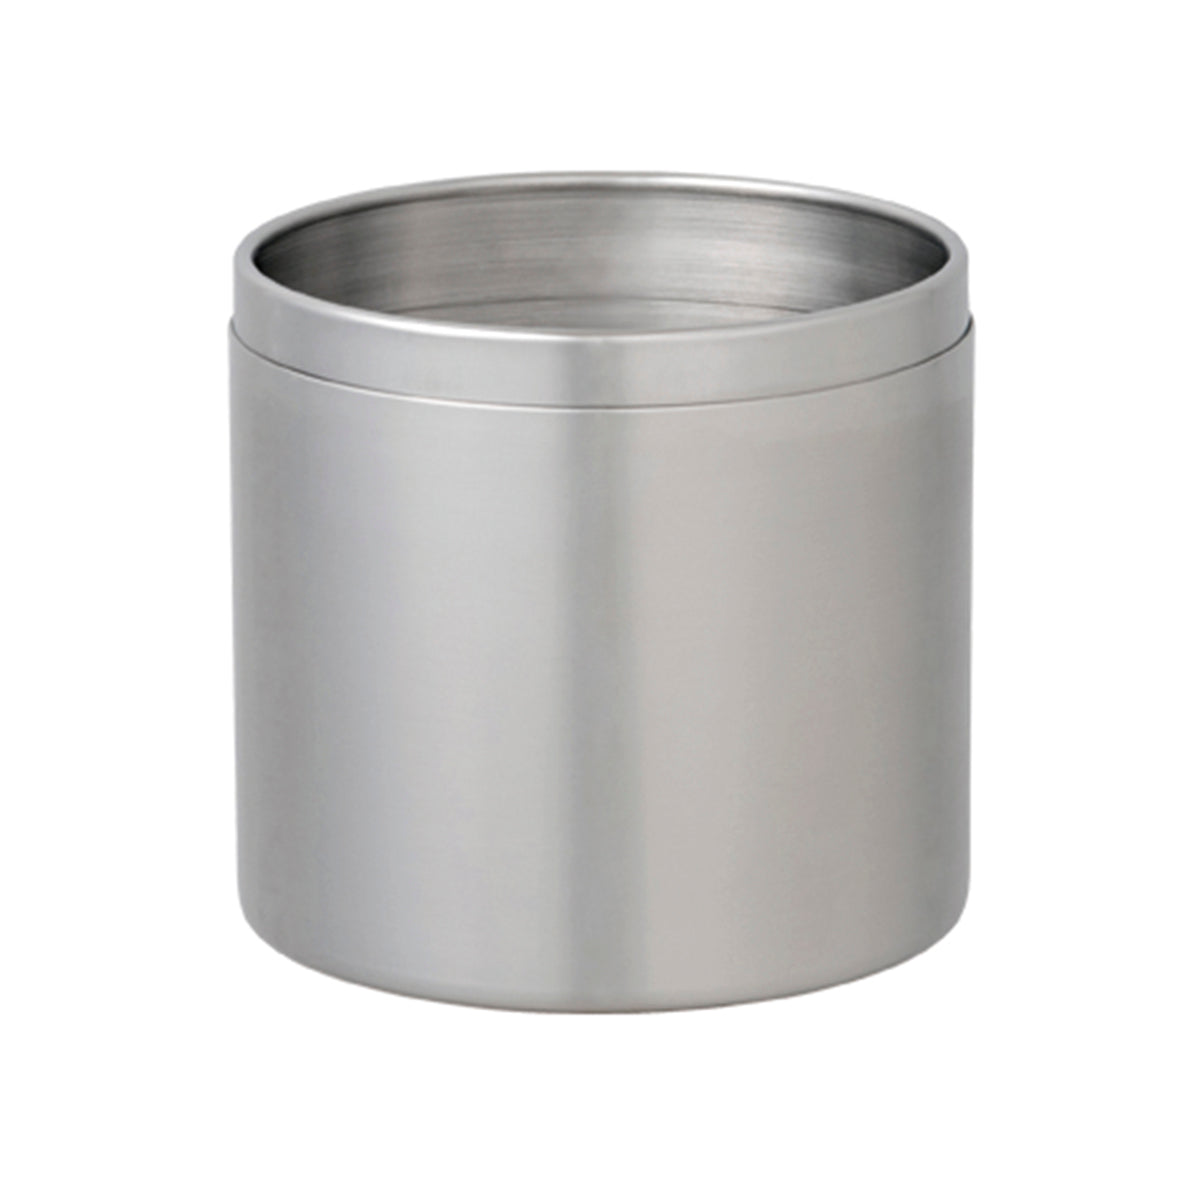 Kinto Stainless Steel Tea Canister 15.3 oz.